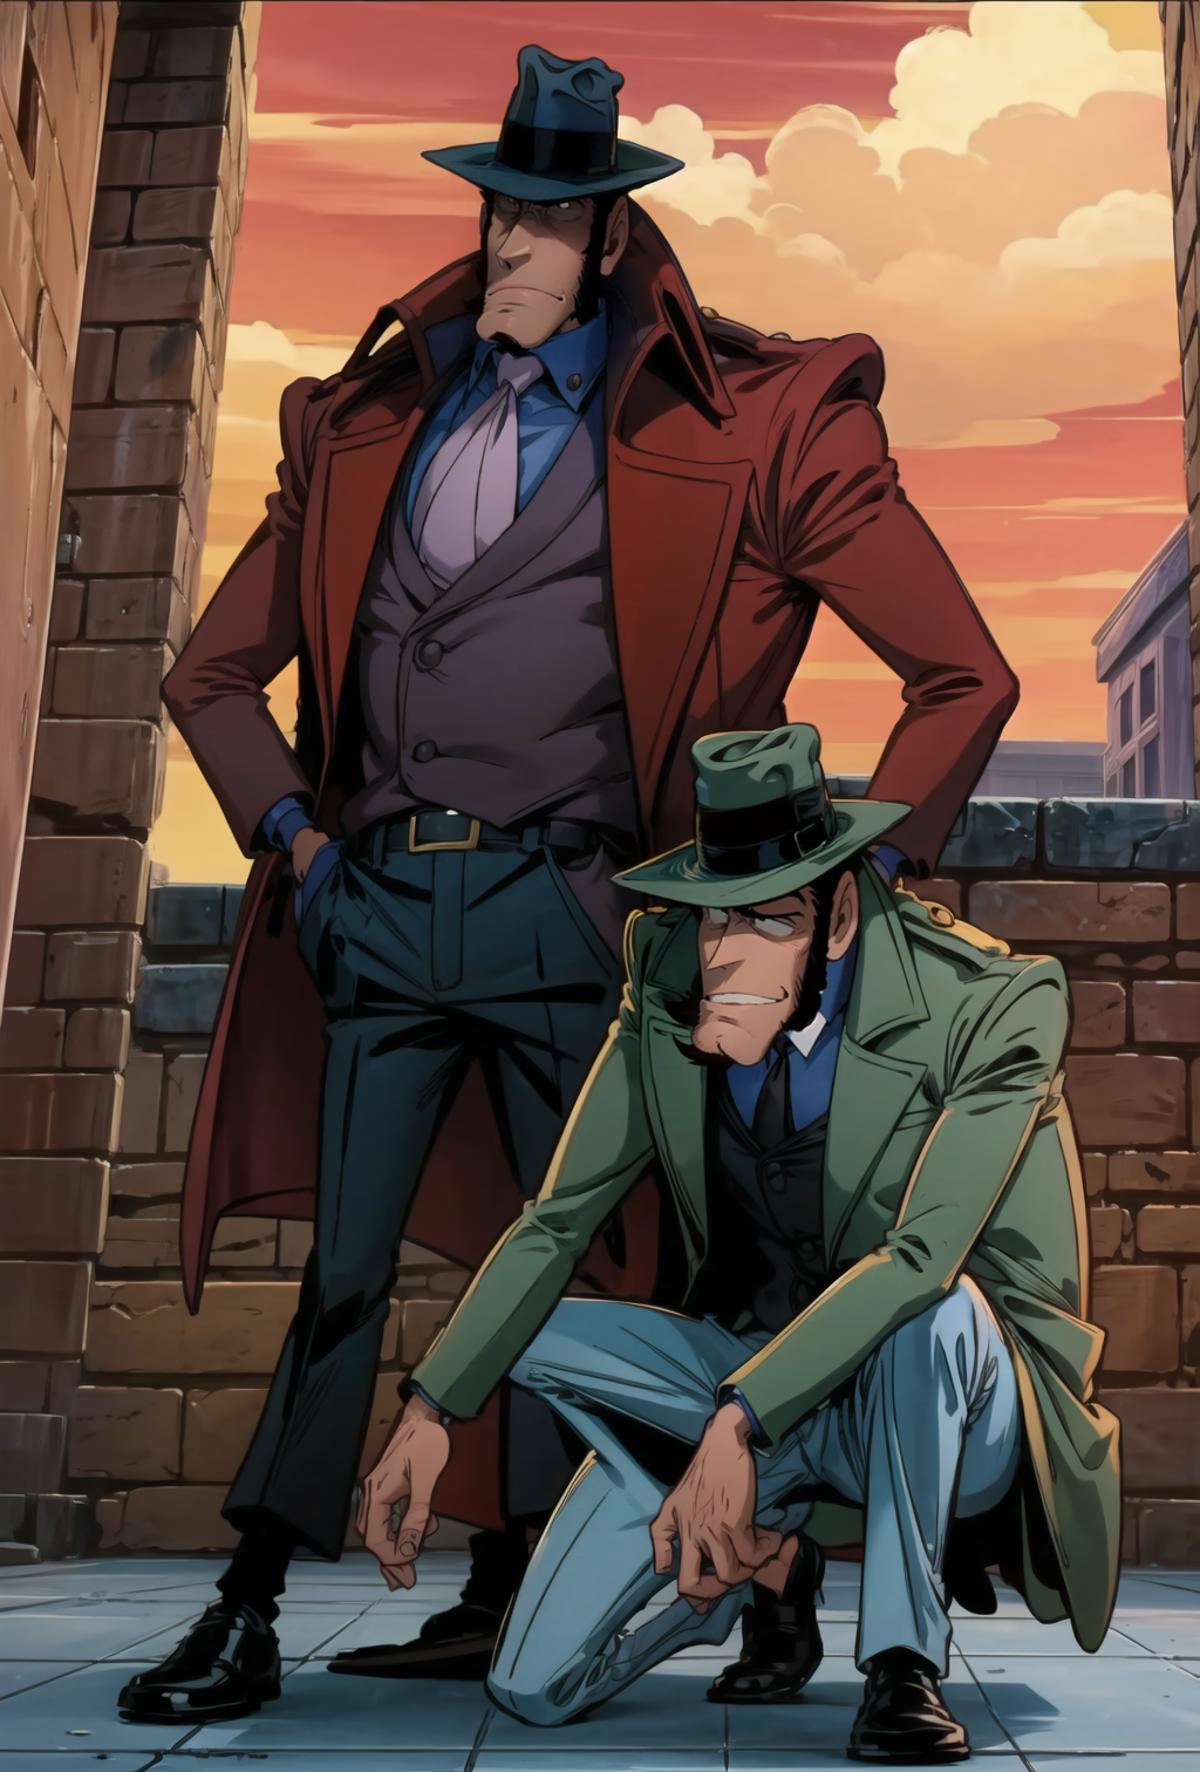 Lupin III Part 2 Artstyle image by Fenchurch